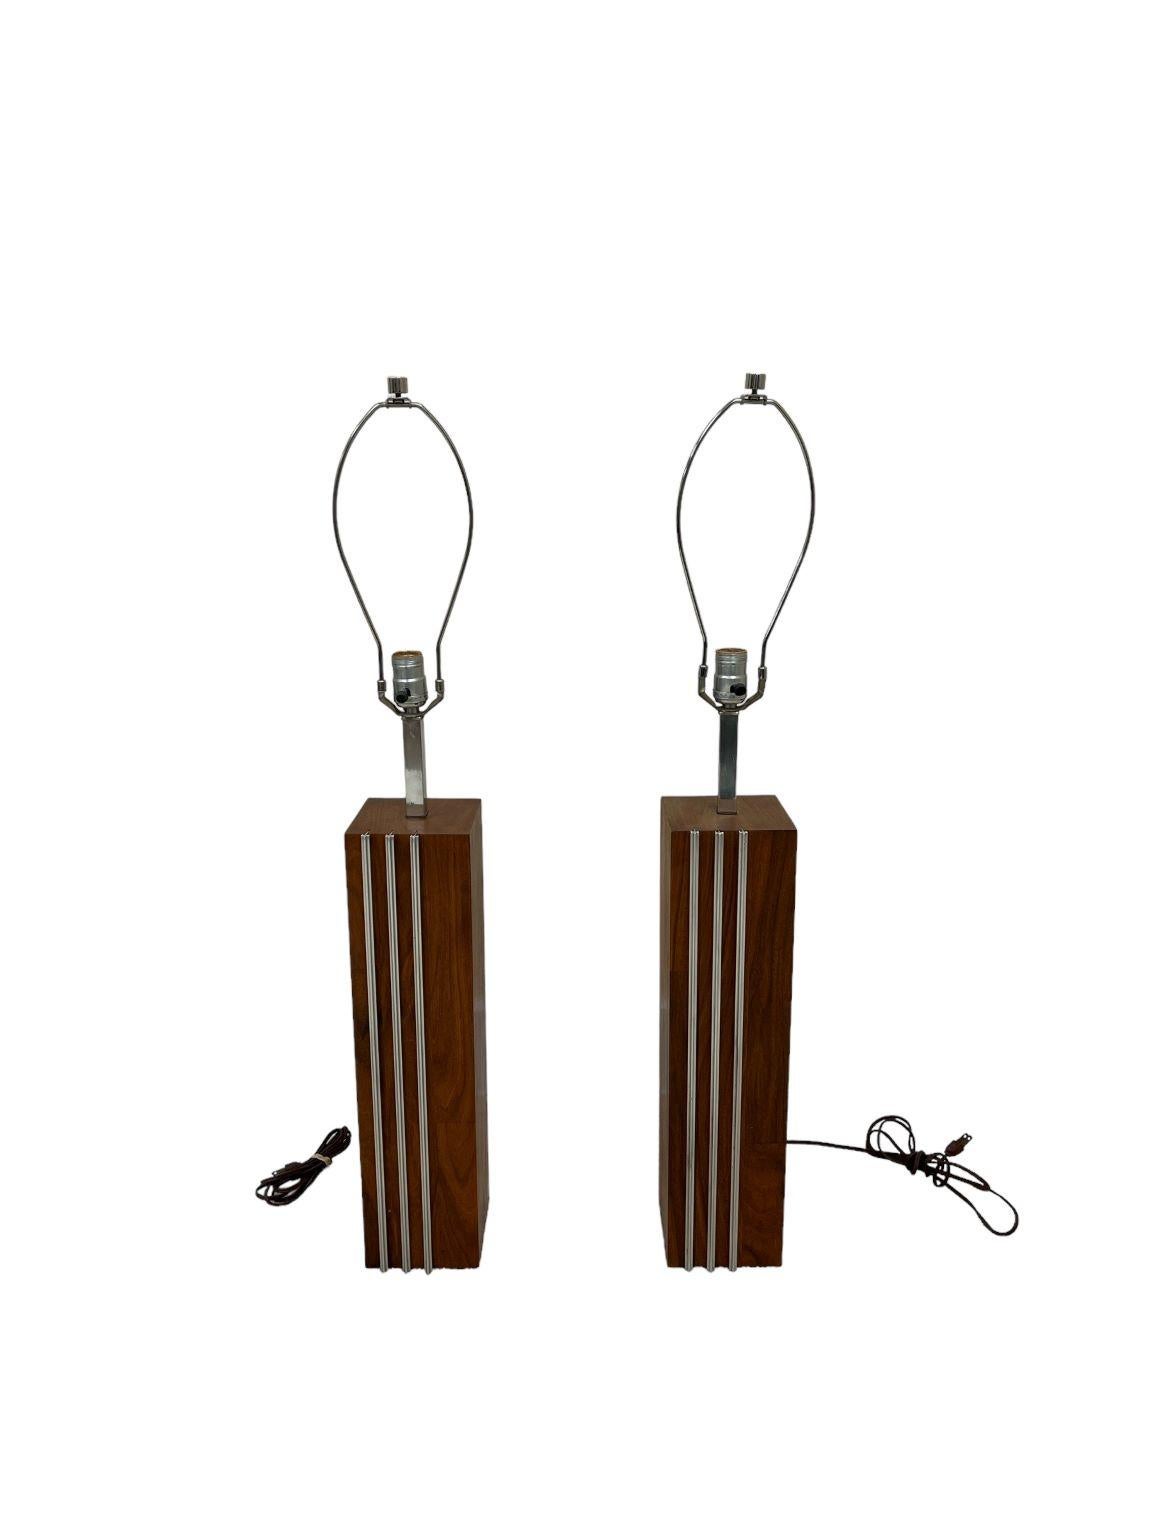 Pair of skillfully crafted simple walnut and chrome lamps by Laurel Lamp Company. Beautiful illustration of Mid Century lighting. Excellent craftsmanship of walnut veneer with three protruding aluminum bands. Marked Laurel lamp on the socket. Shades